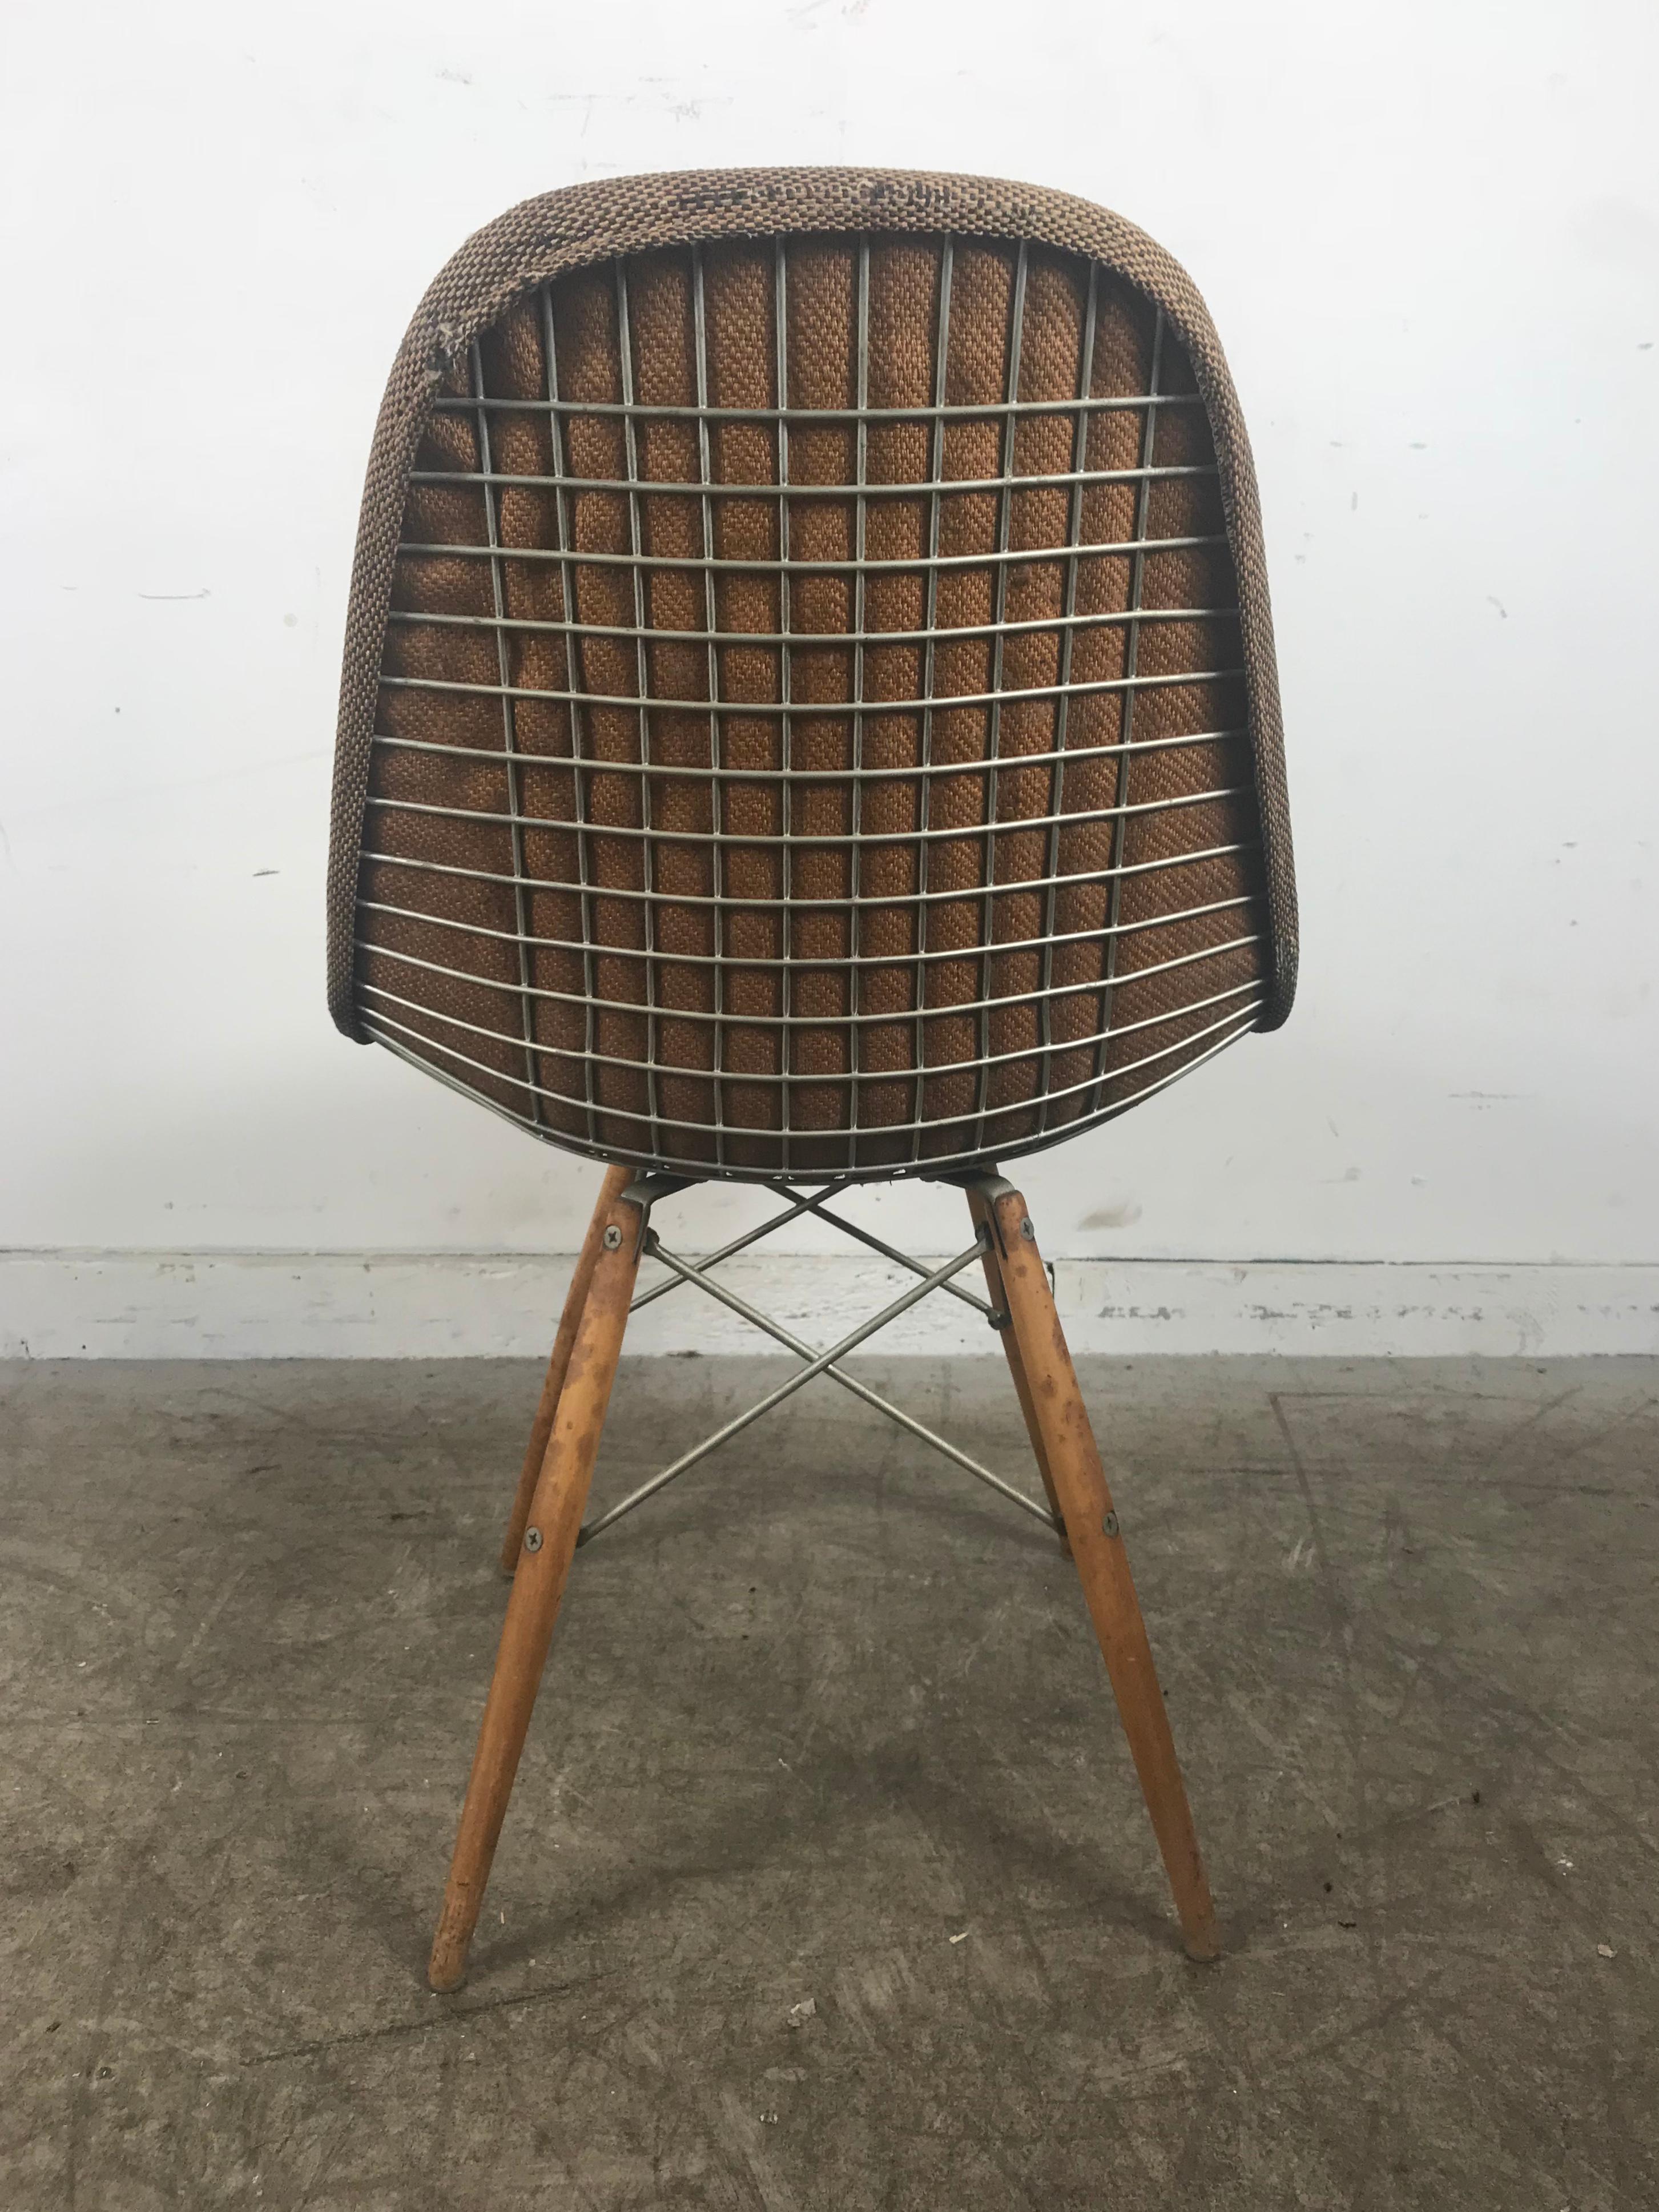 Early Charles Eames dowel leg chair, 1950s DKW-2 Herman Miller, nice original condition retains original Alexander Girrard seat cover as well as original Herman Miller label, elusive zinc metal structure, nice early example of classic modernist